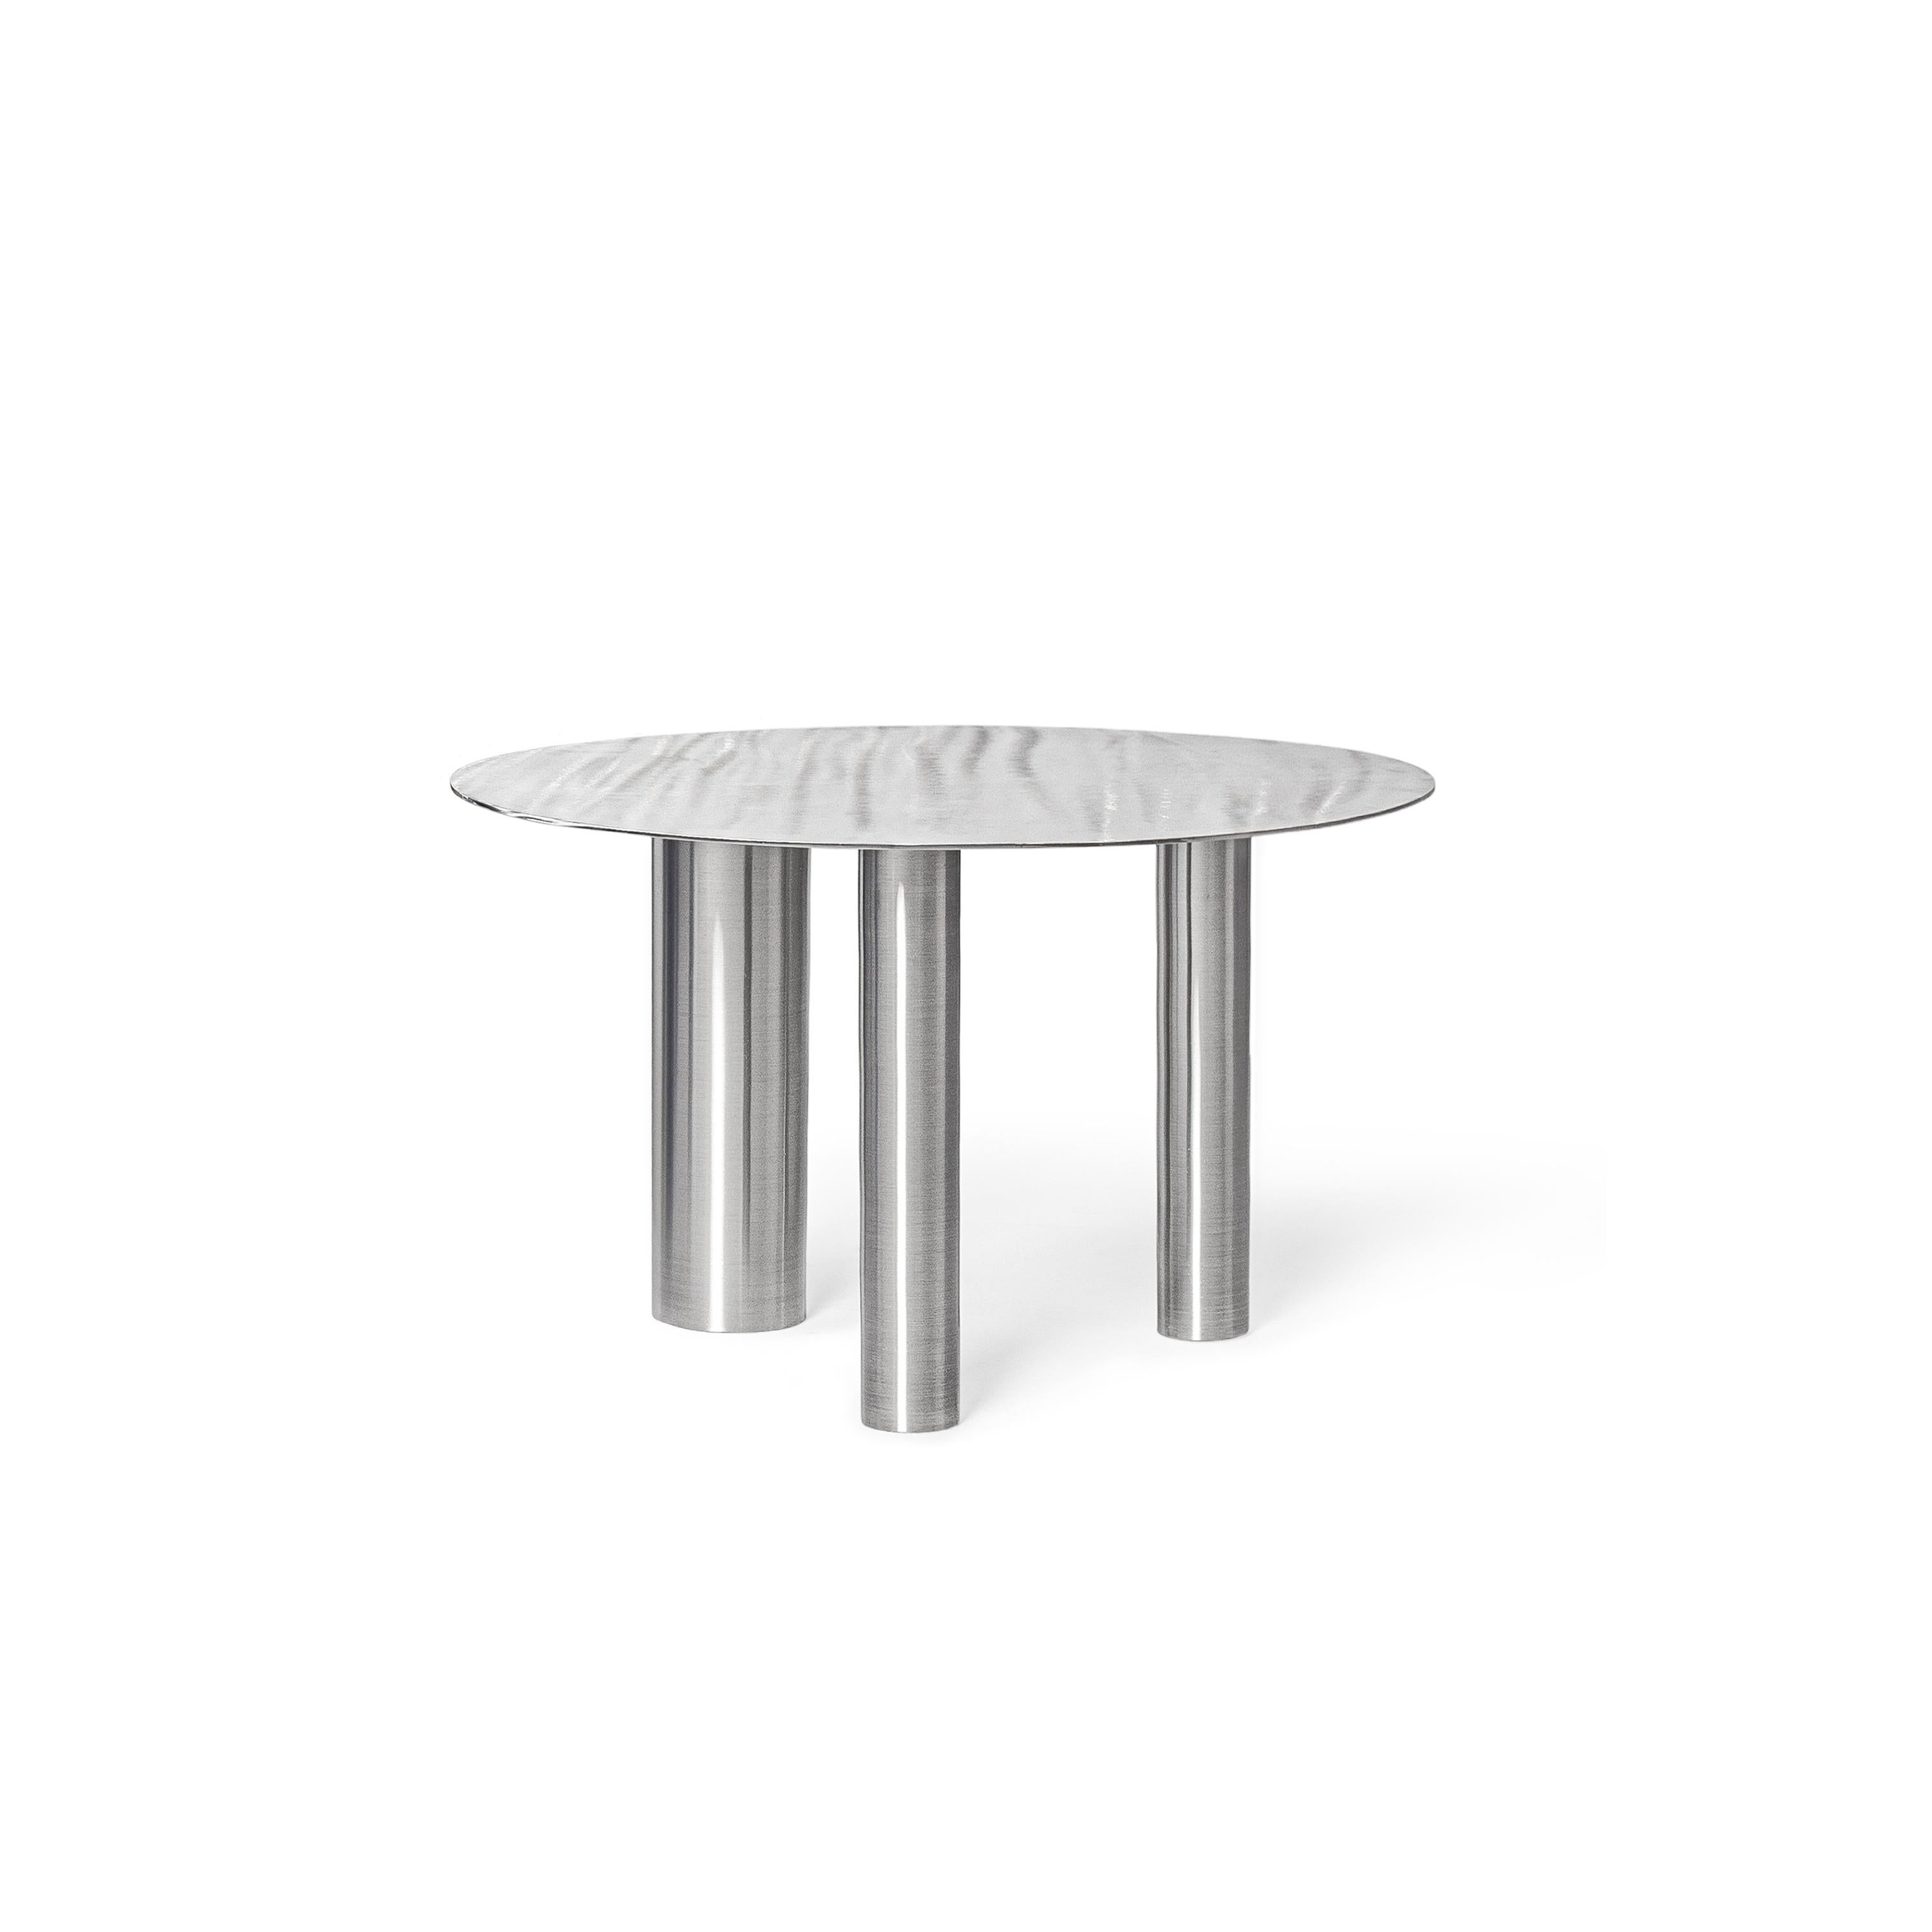 Ukrainian Low Coffee Table Brandt CS1 made of stainless steel by Noom